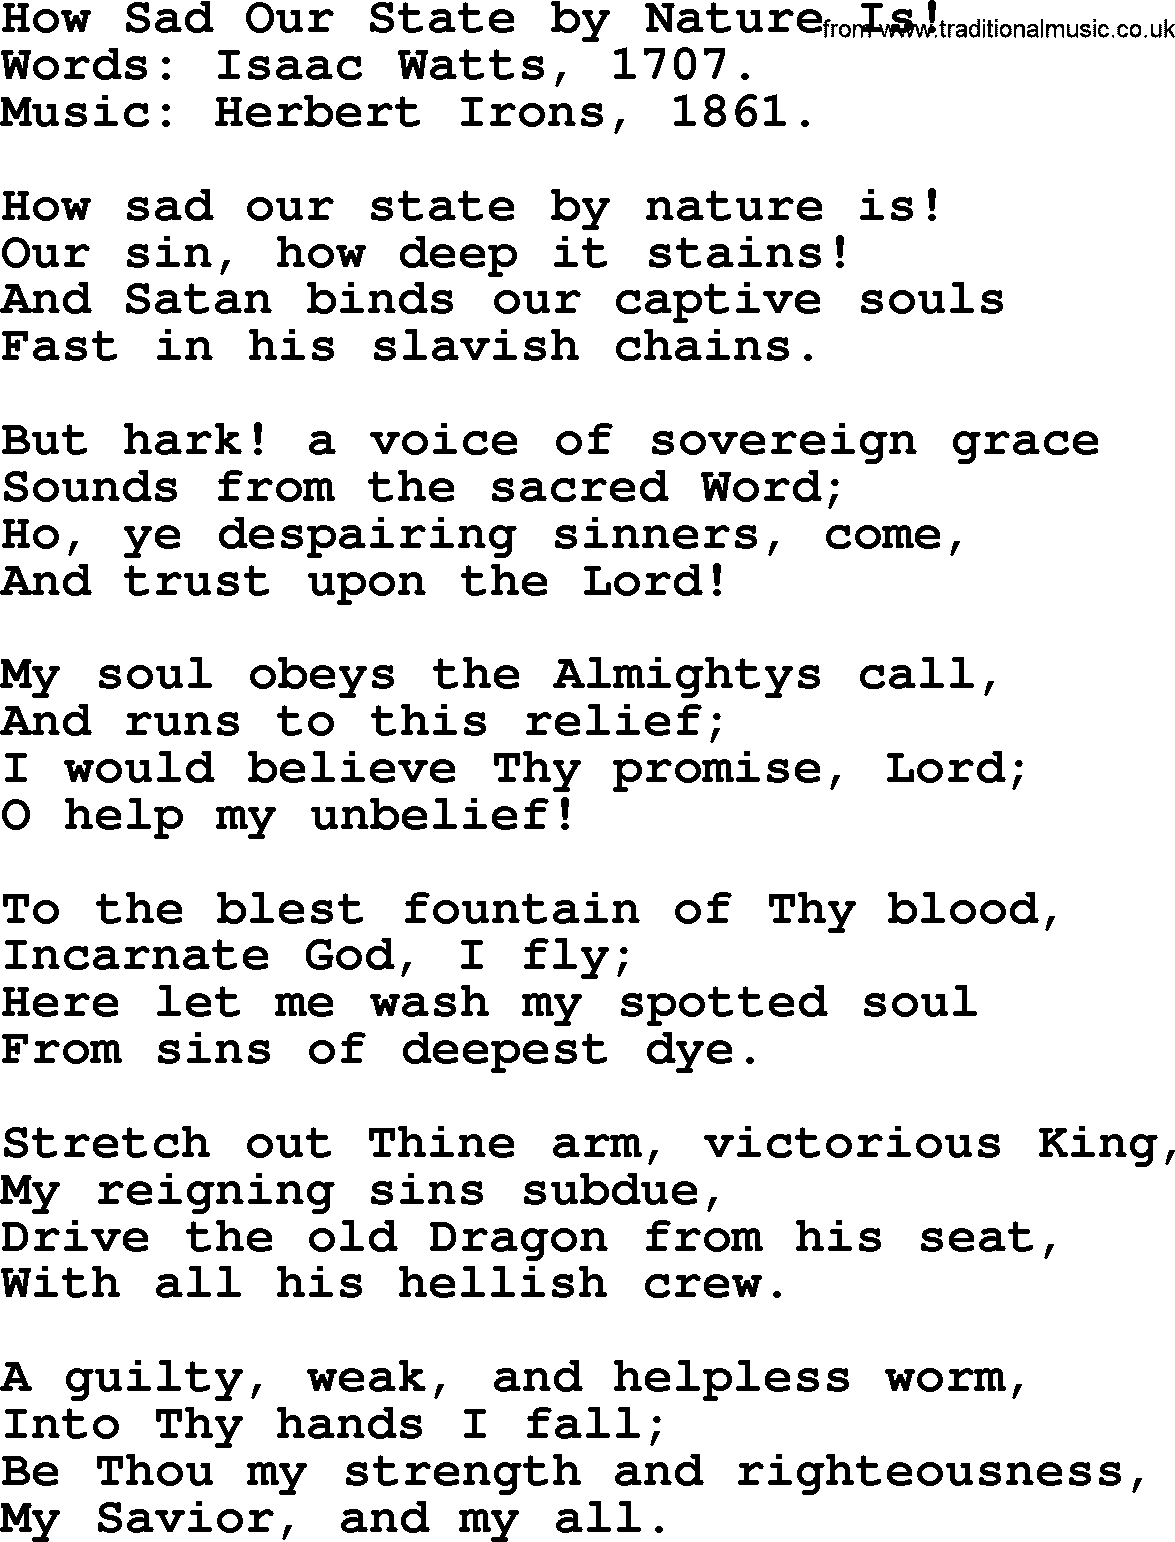 Isaac Watts Christian hymn: How Sad Our State by Nature Is!- lyricss